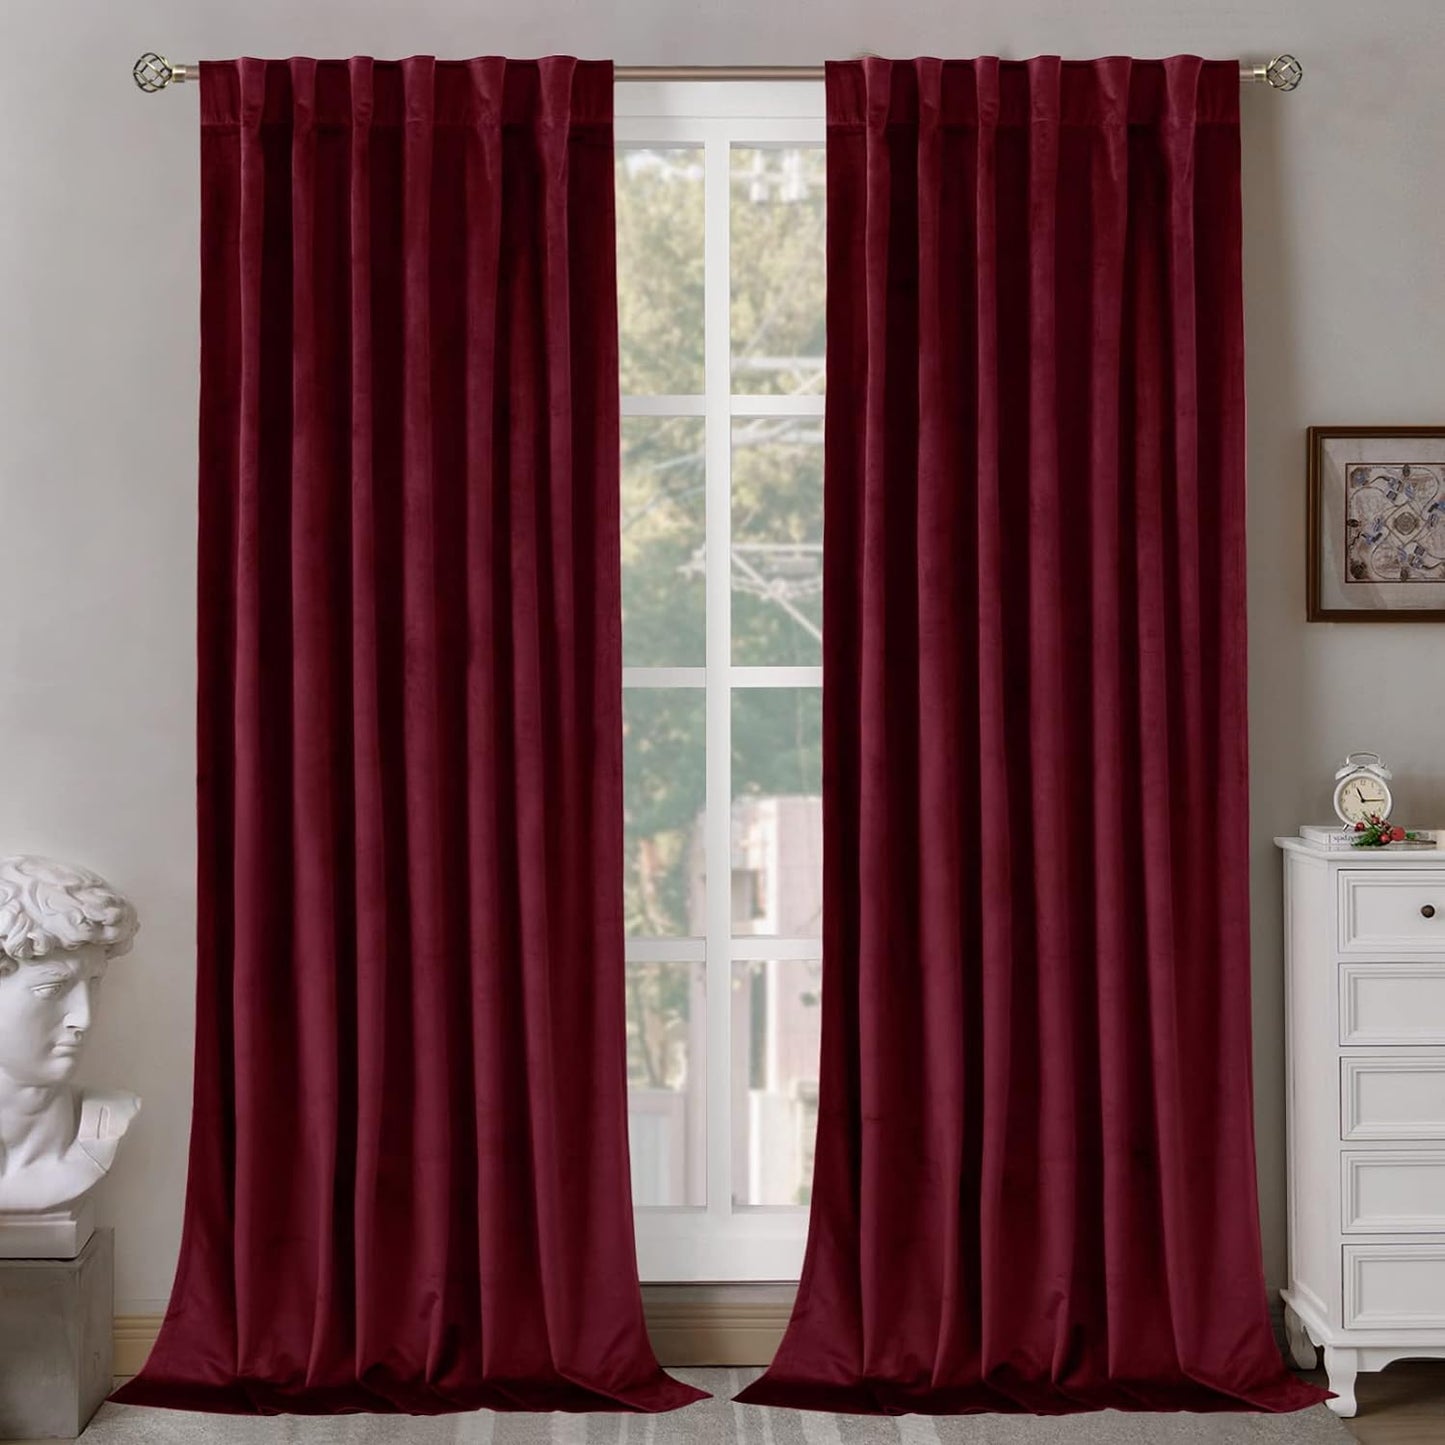 Bgment Grey Velvet Curtains 108 Inches Long for Living Room, Thermal Insulated Room Darkening Curtains Drapes Window Treatment with Back Tab and Rod Pocket, Set of 2 Panels, 52 X 108 Inch  BGment Red 52W X 120L 